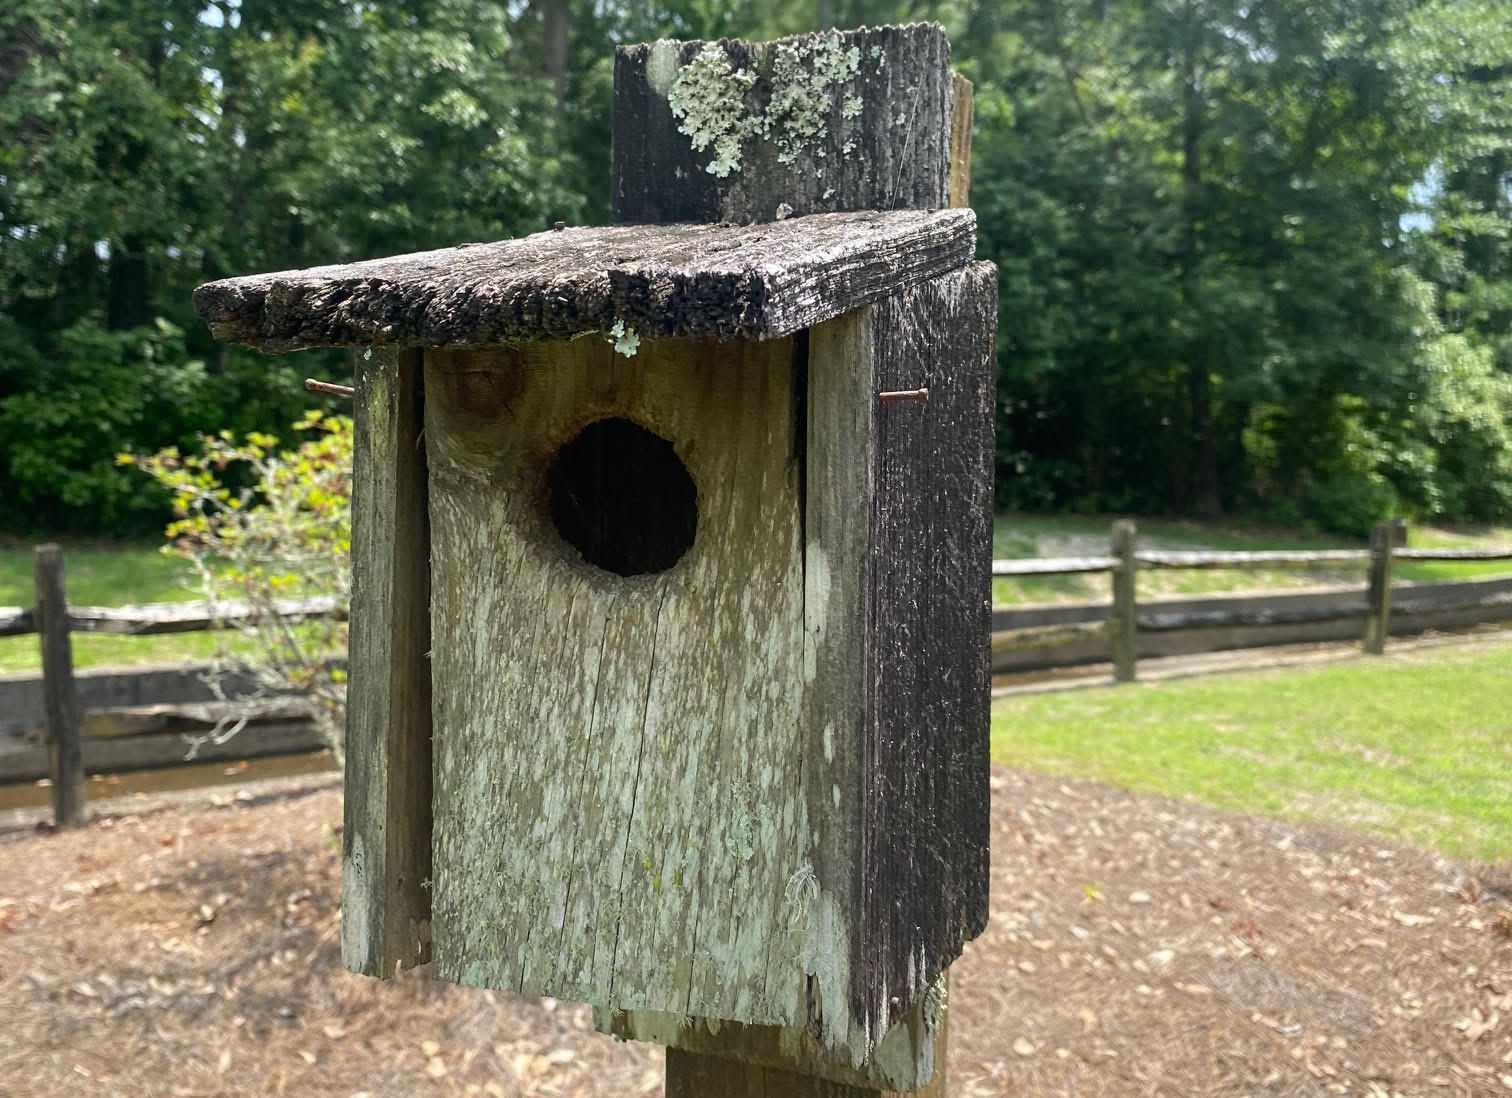 Birdhouse Design Contest Encourages Creativity in New Project